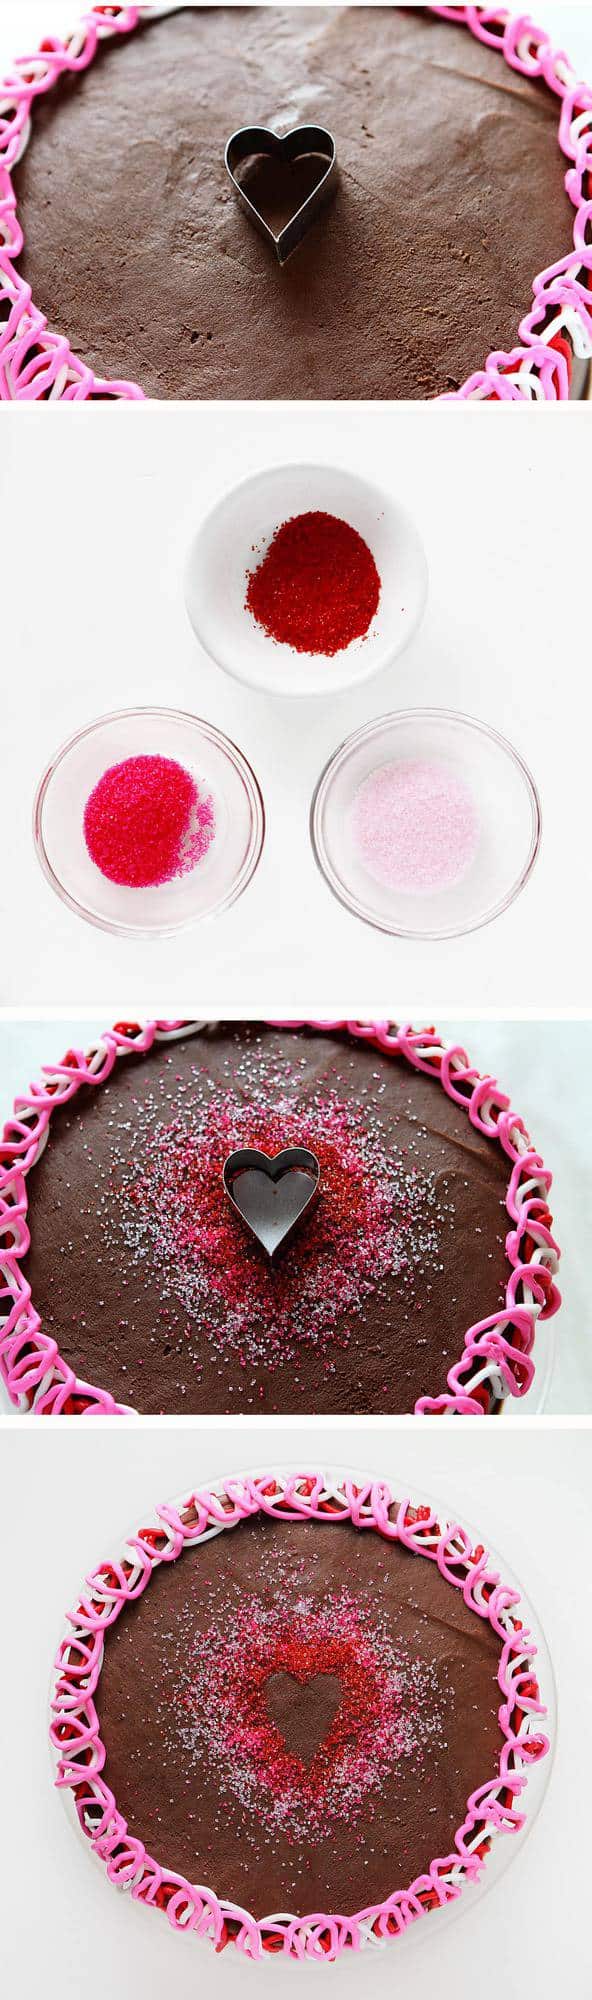 Heart Shape in Sprinkles for Cake Decorating- Perfect for Valentine's Day!